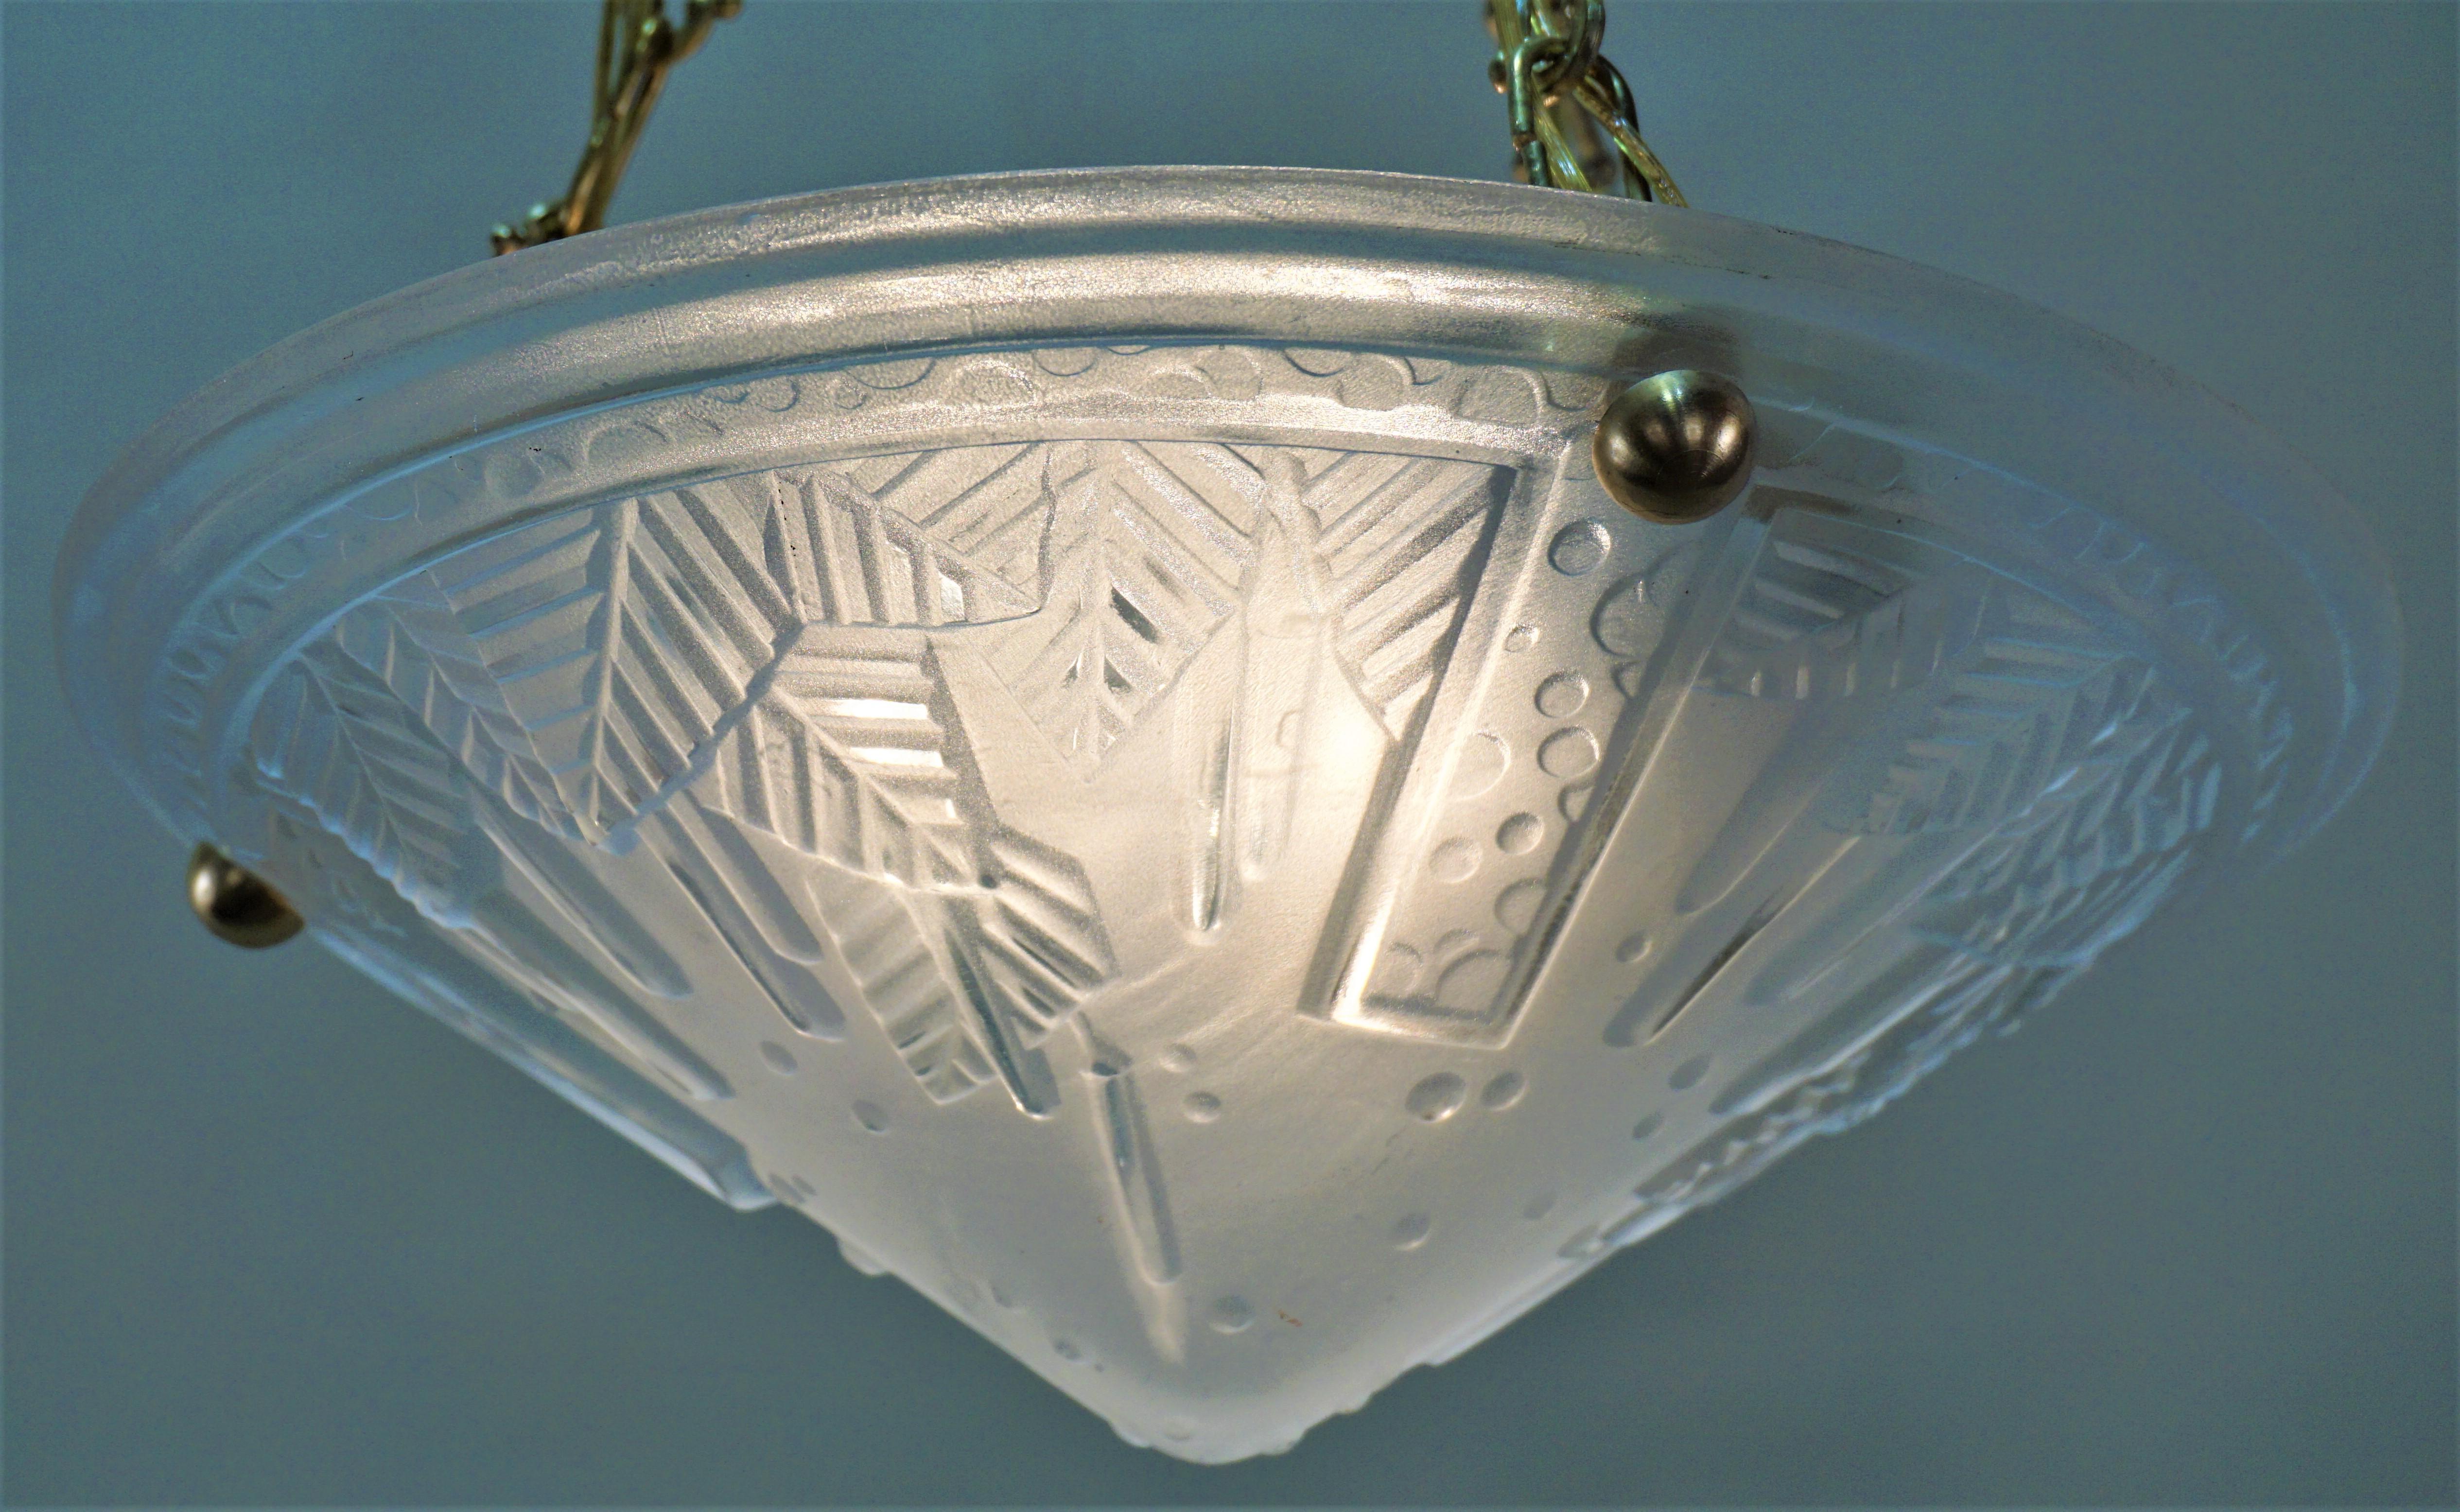 Pair of French Art Deco clear frost glass ceiling Light with bronze hardware.
Three lights, 60 watt each.